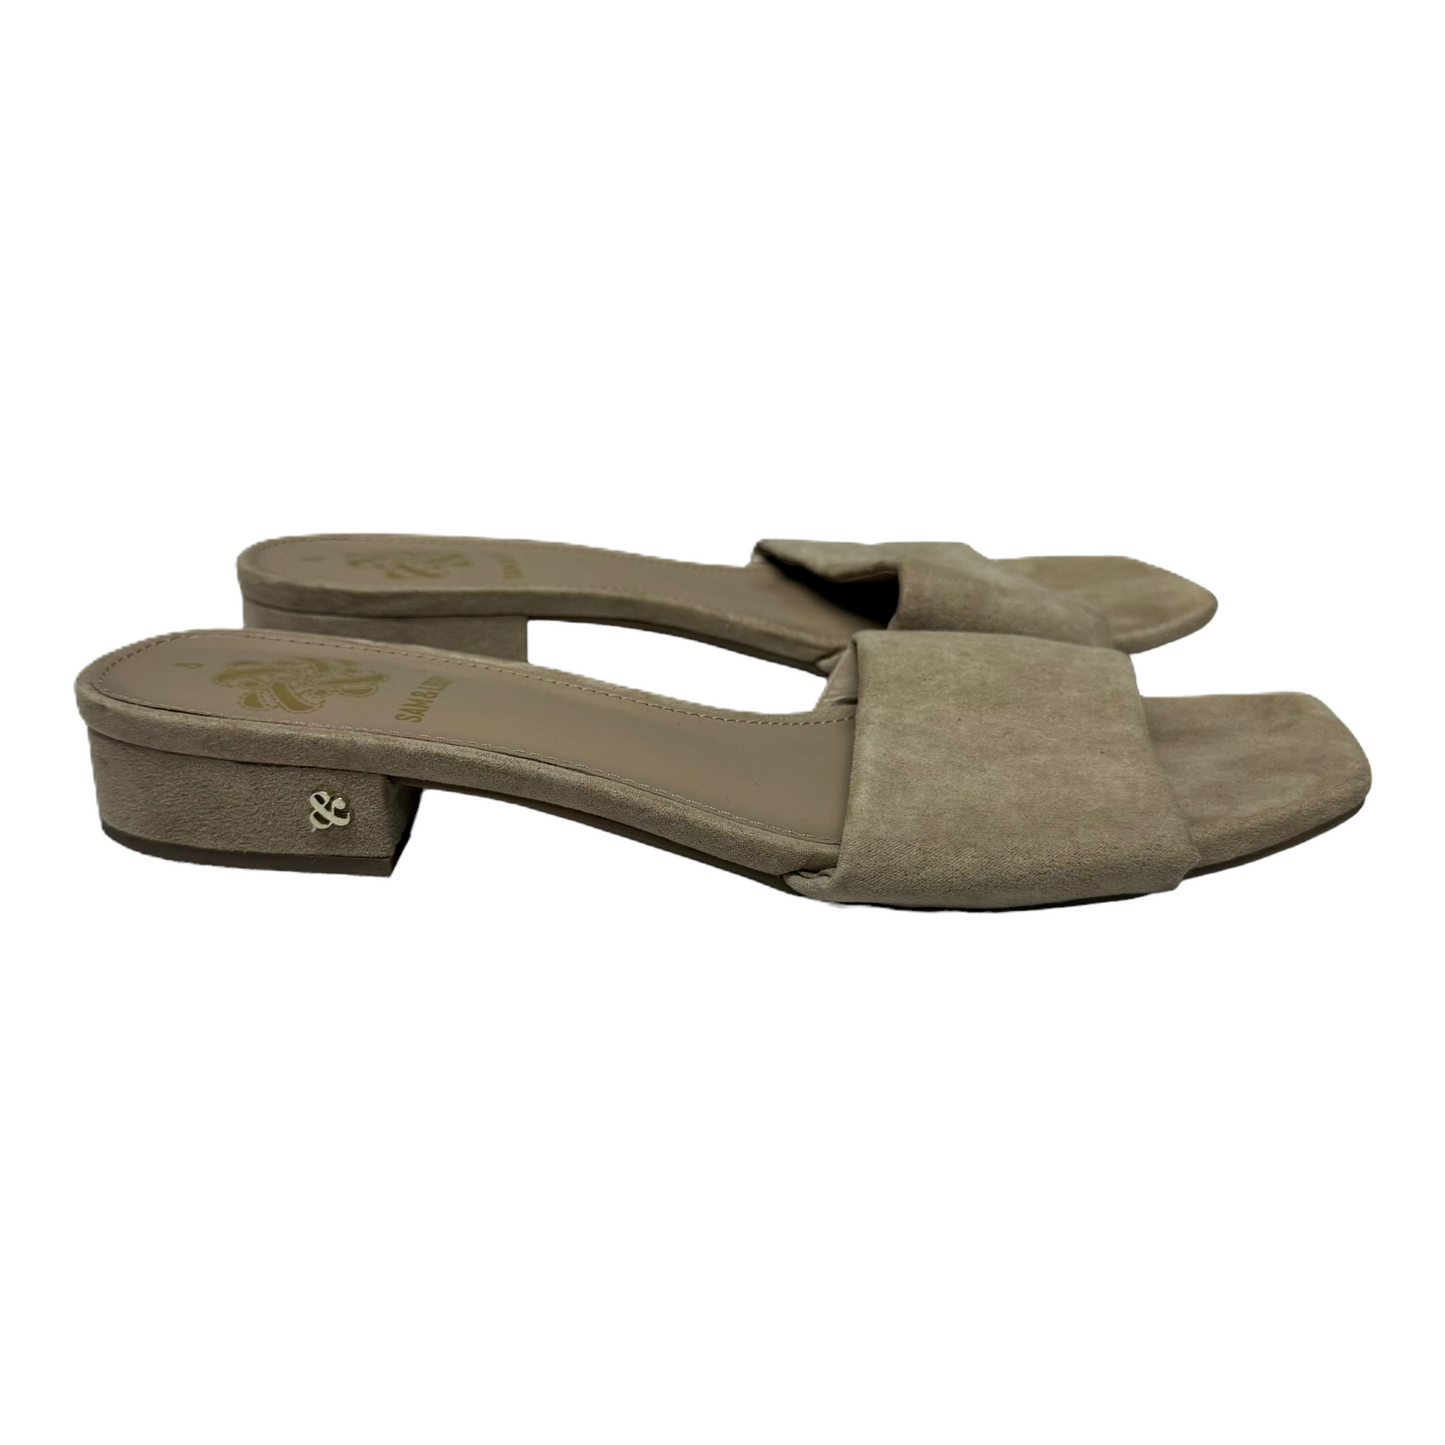 Tan Sandals Flats By Sam And Libby, Size: 8